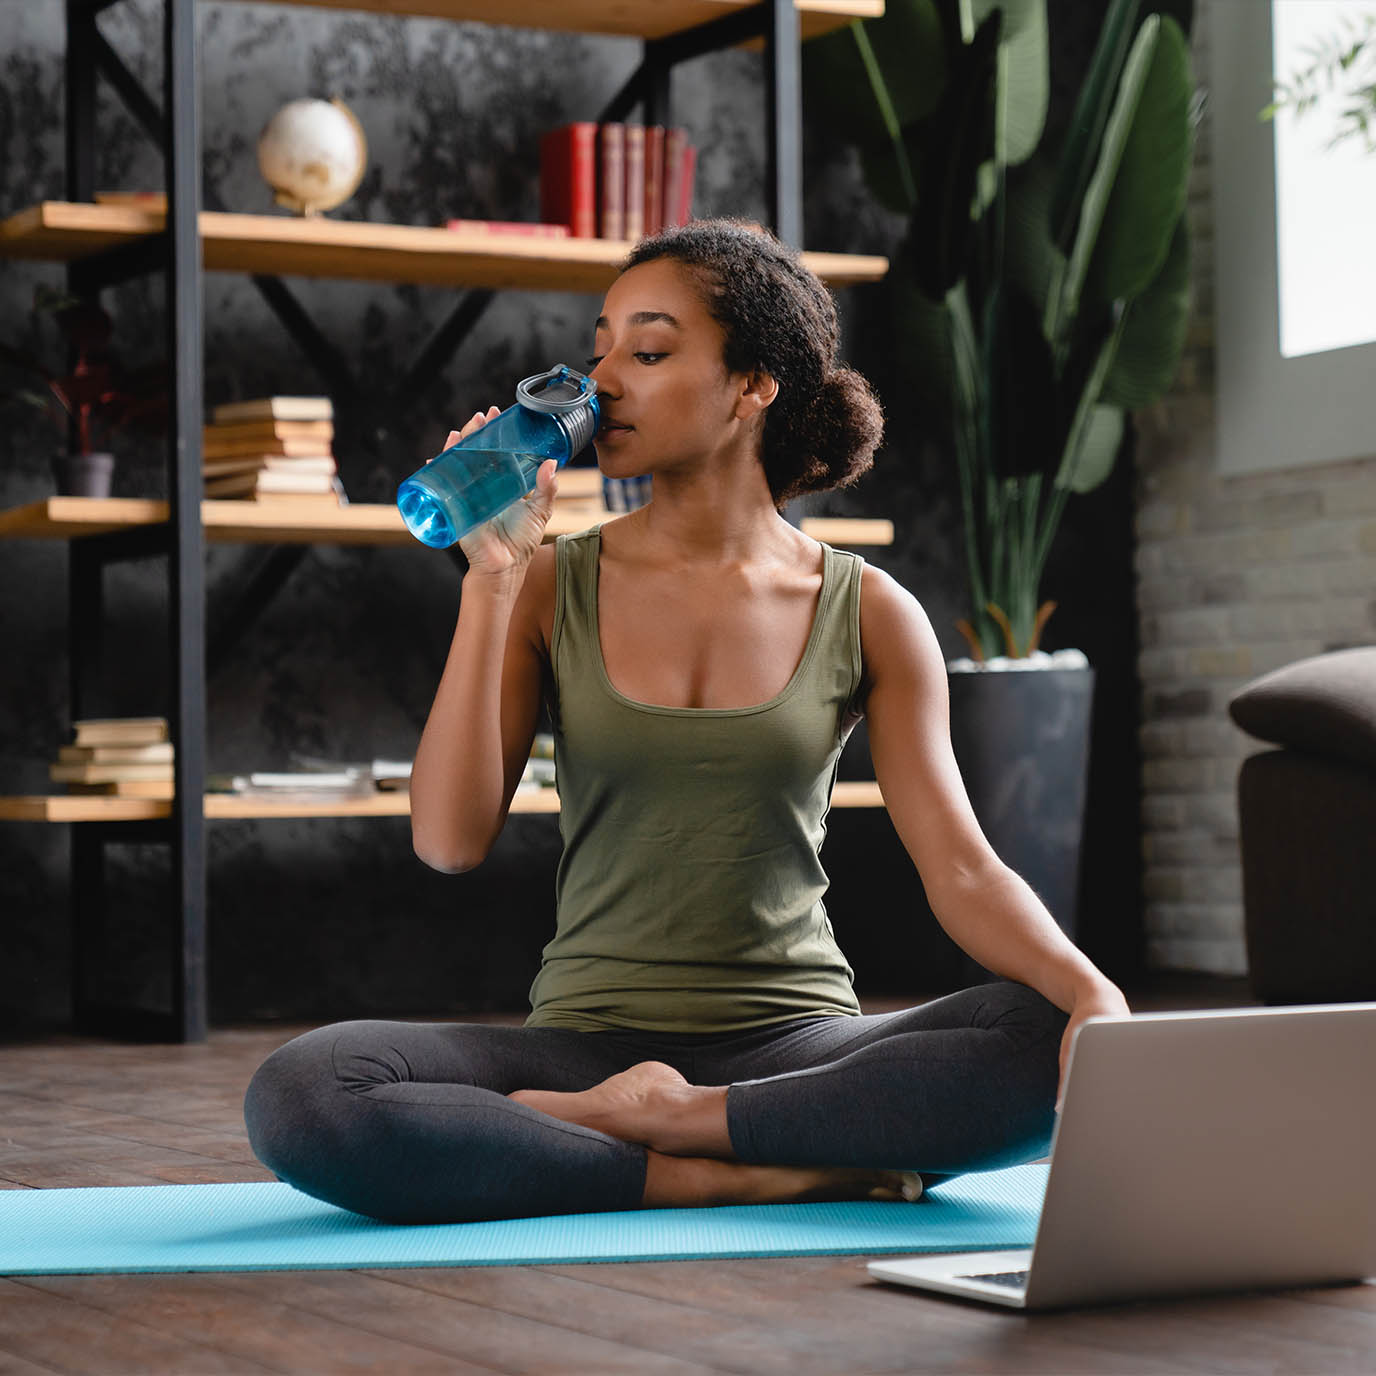 Understand what wellness regimes can help you live a stress-free life